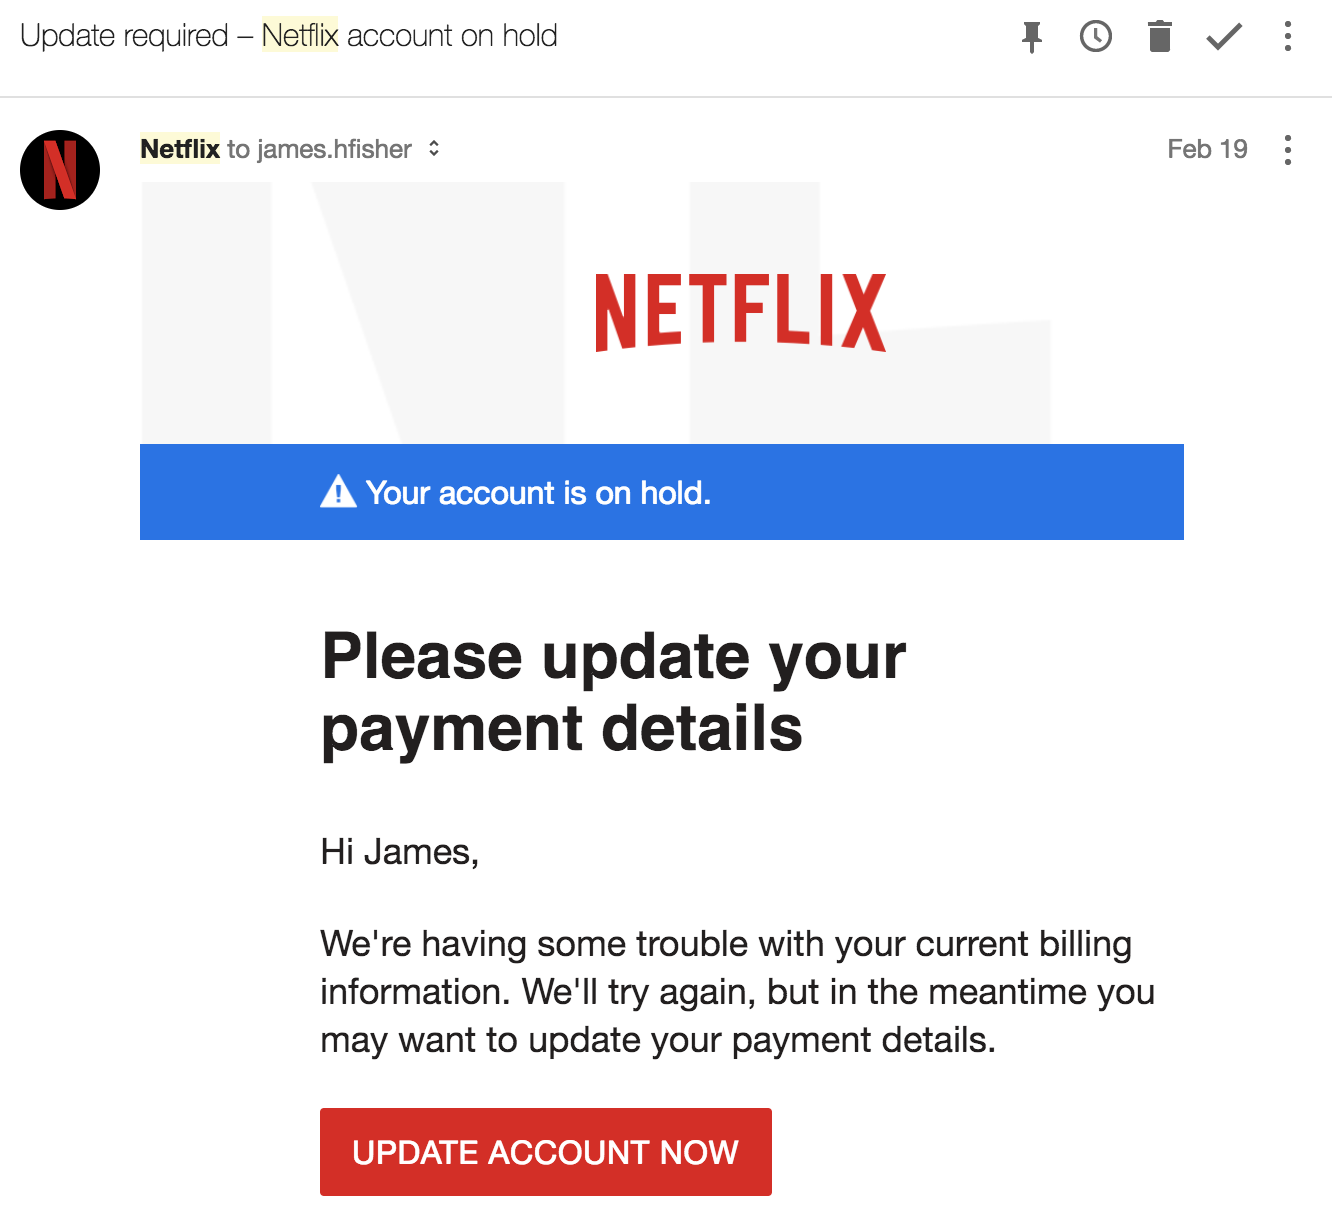 email from Netflix